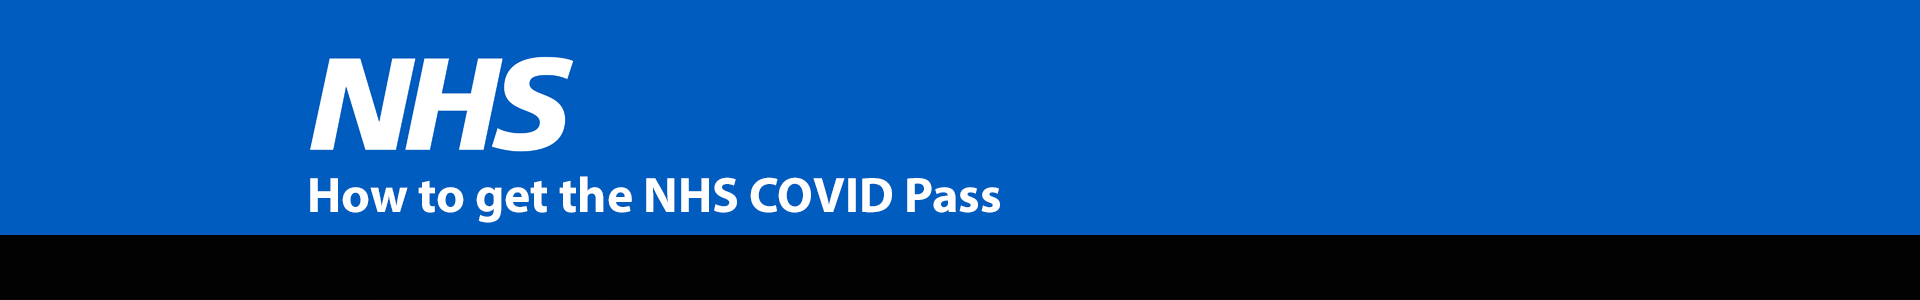 How to get your NHS COVID Pass